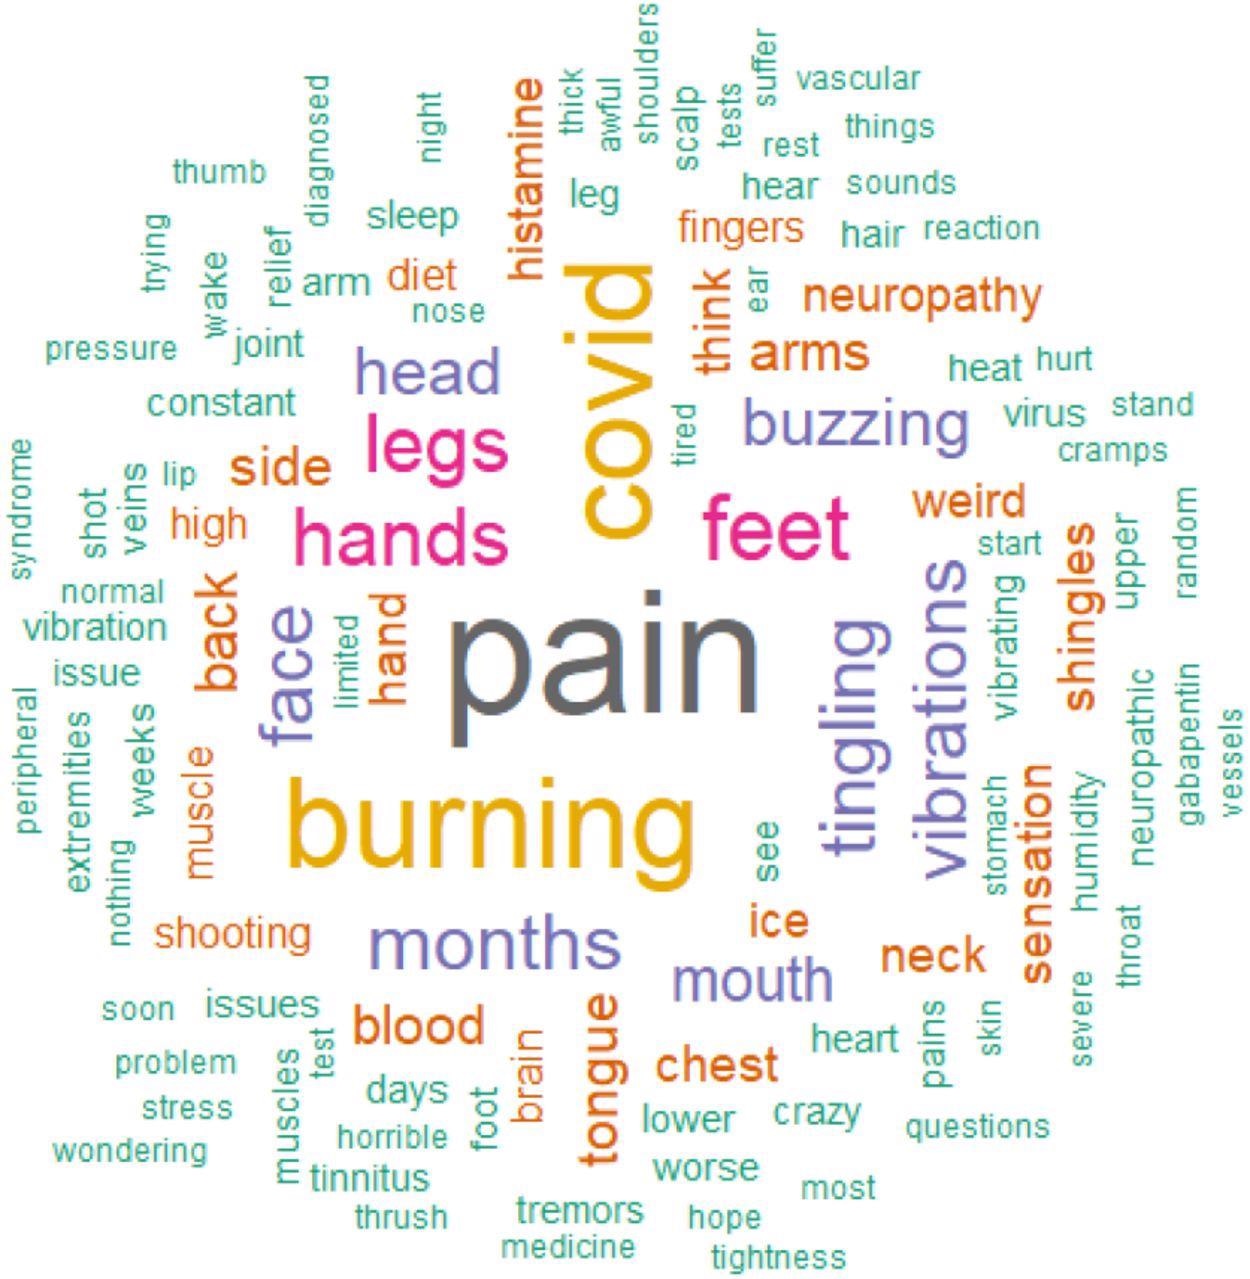 Word Cloud generated from Survivor Corps Facebook comments in response to poll related to vibrations, buzzing, and neuropathic pain